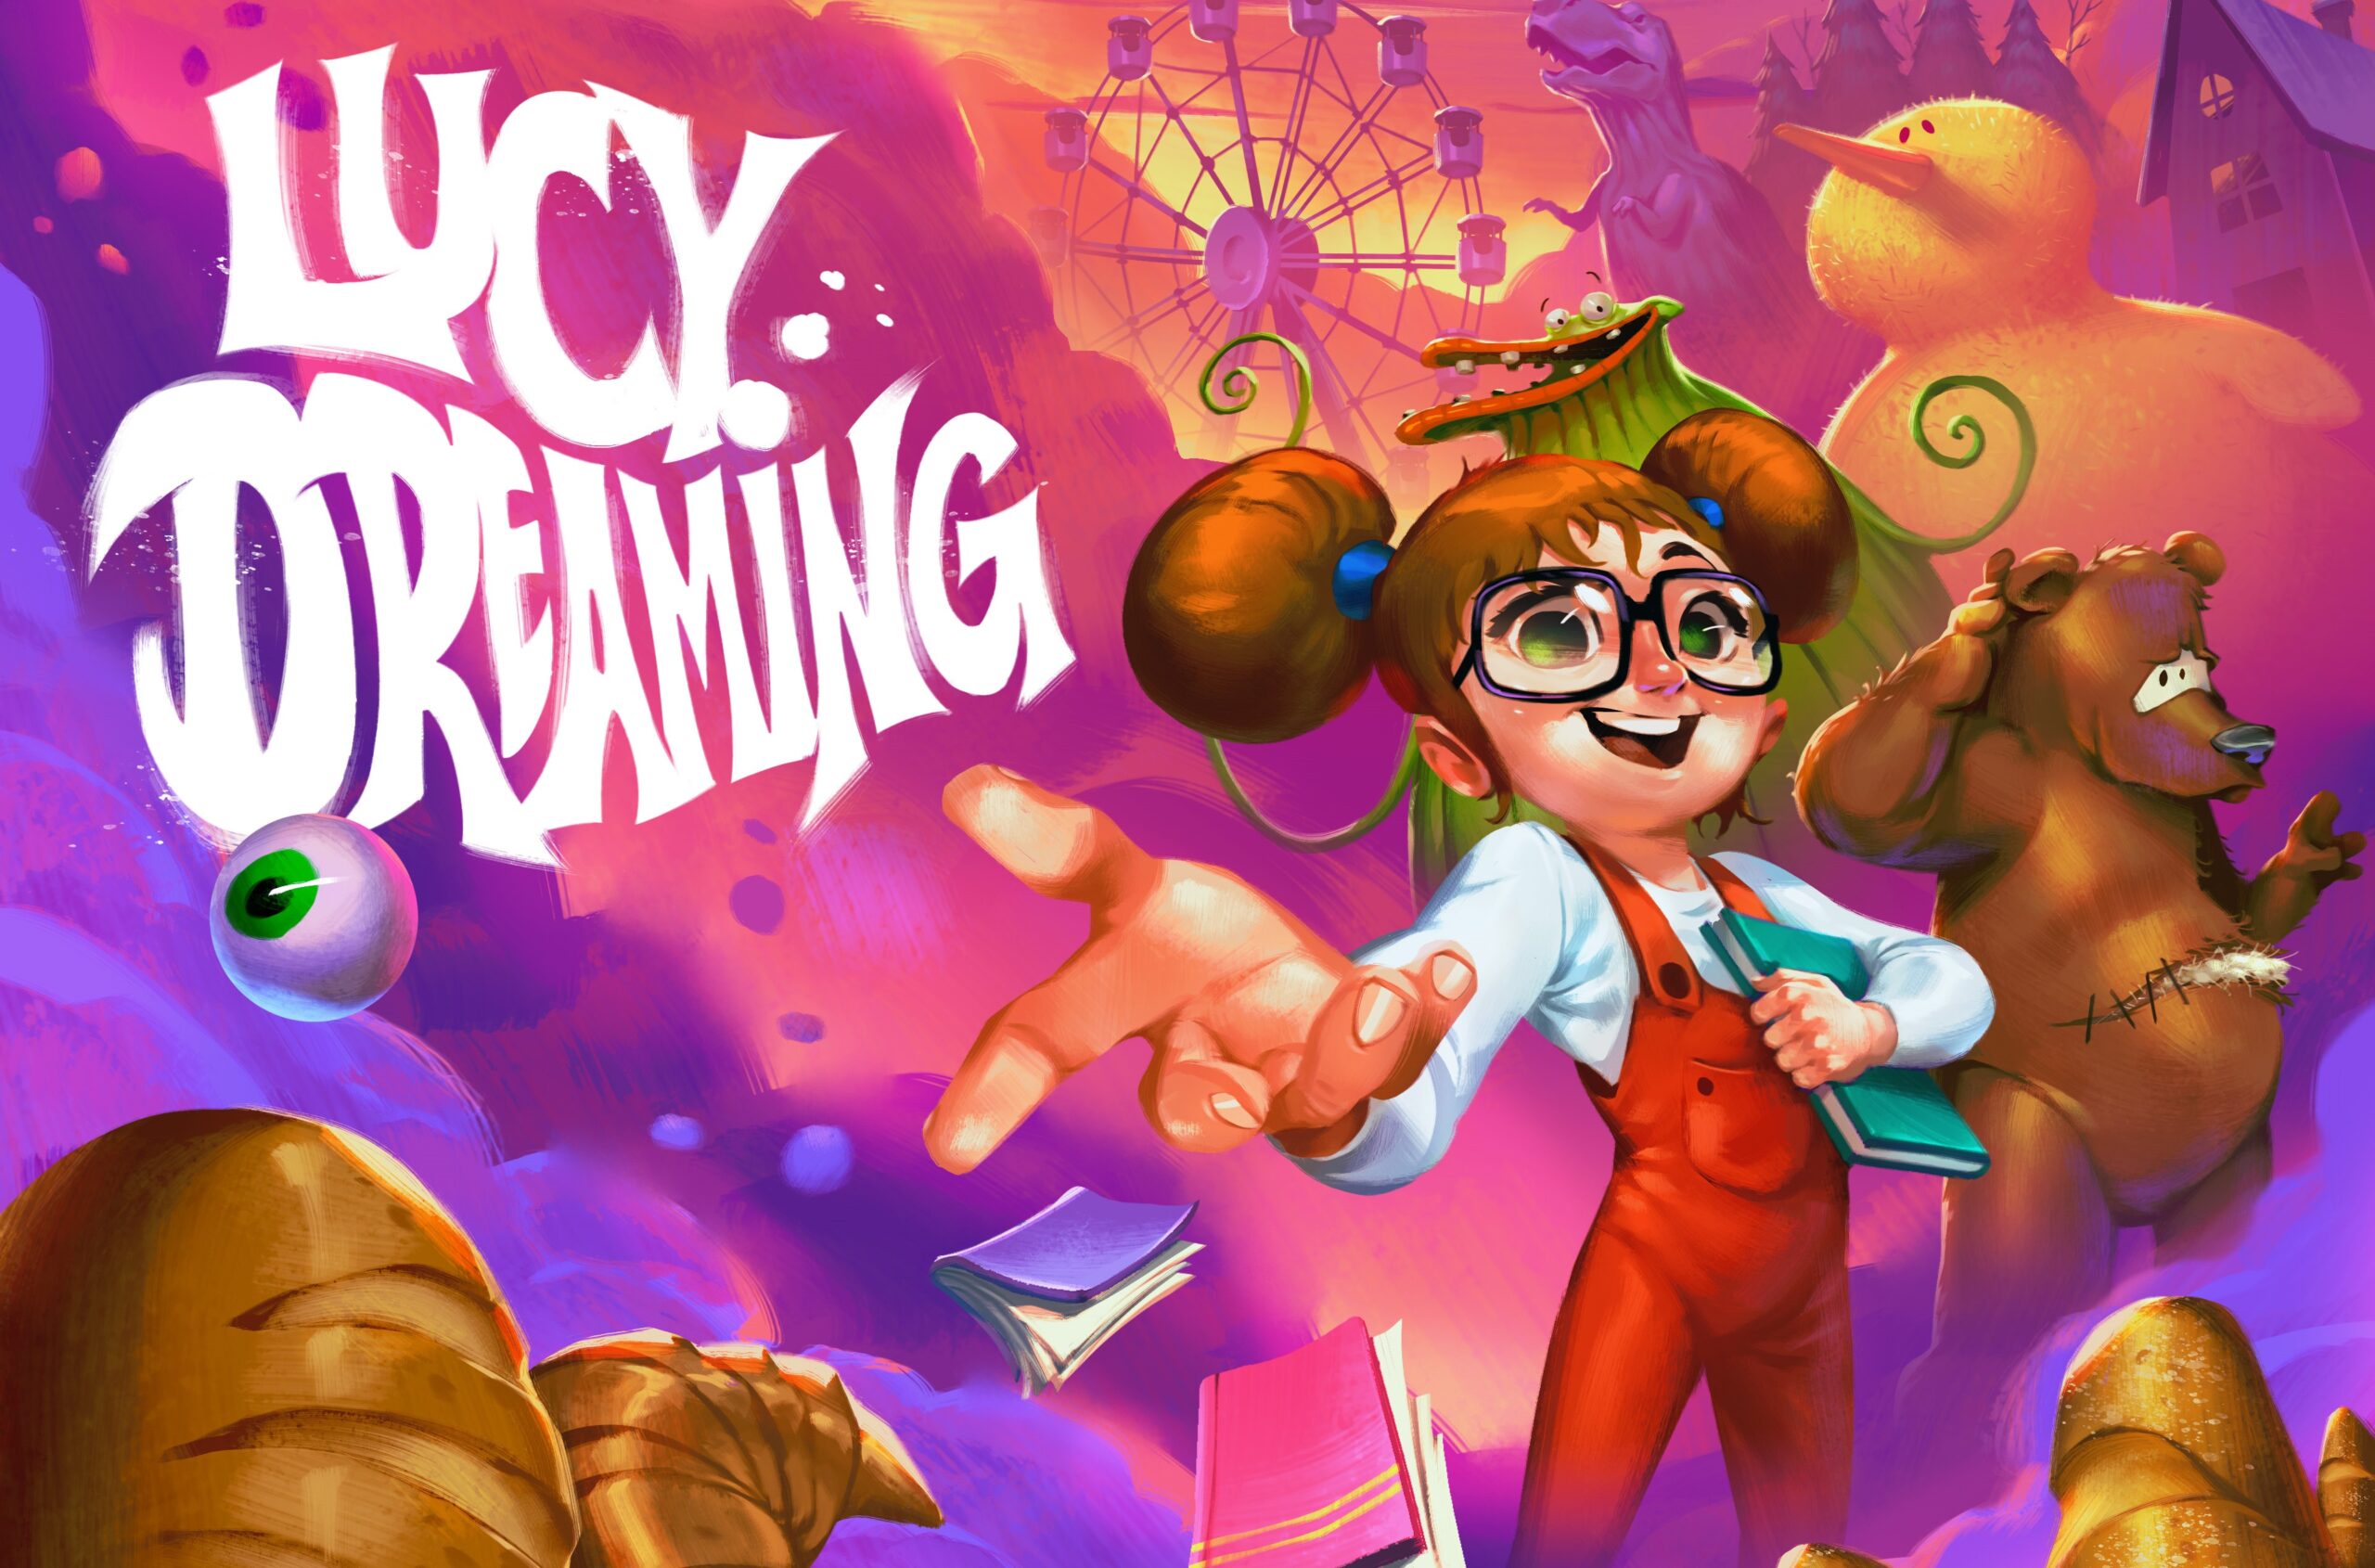 Lucy Dreaming review – Never quite as it seems